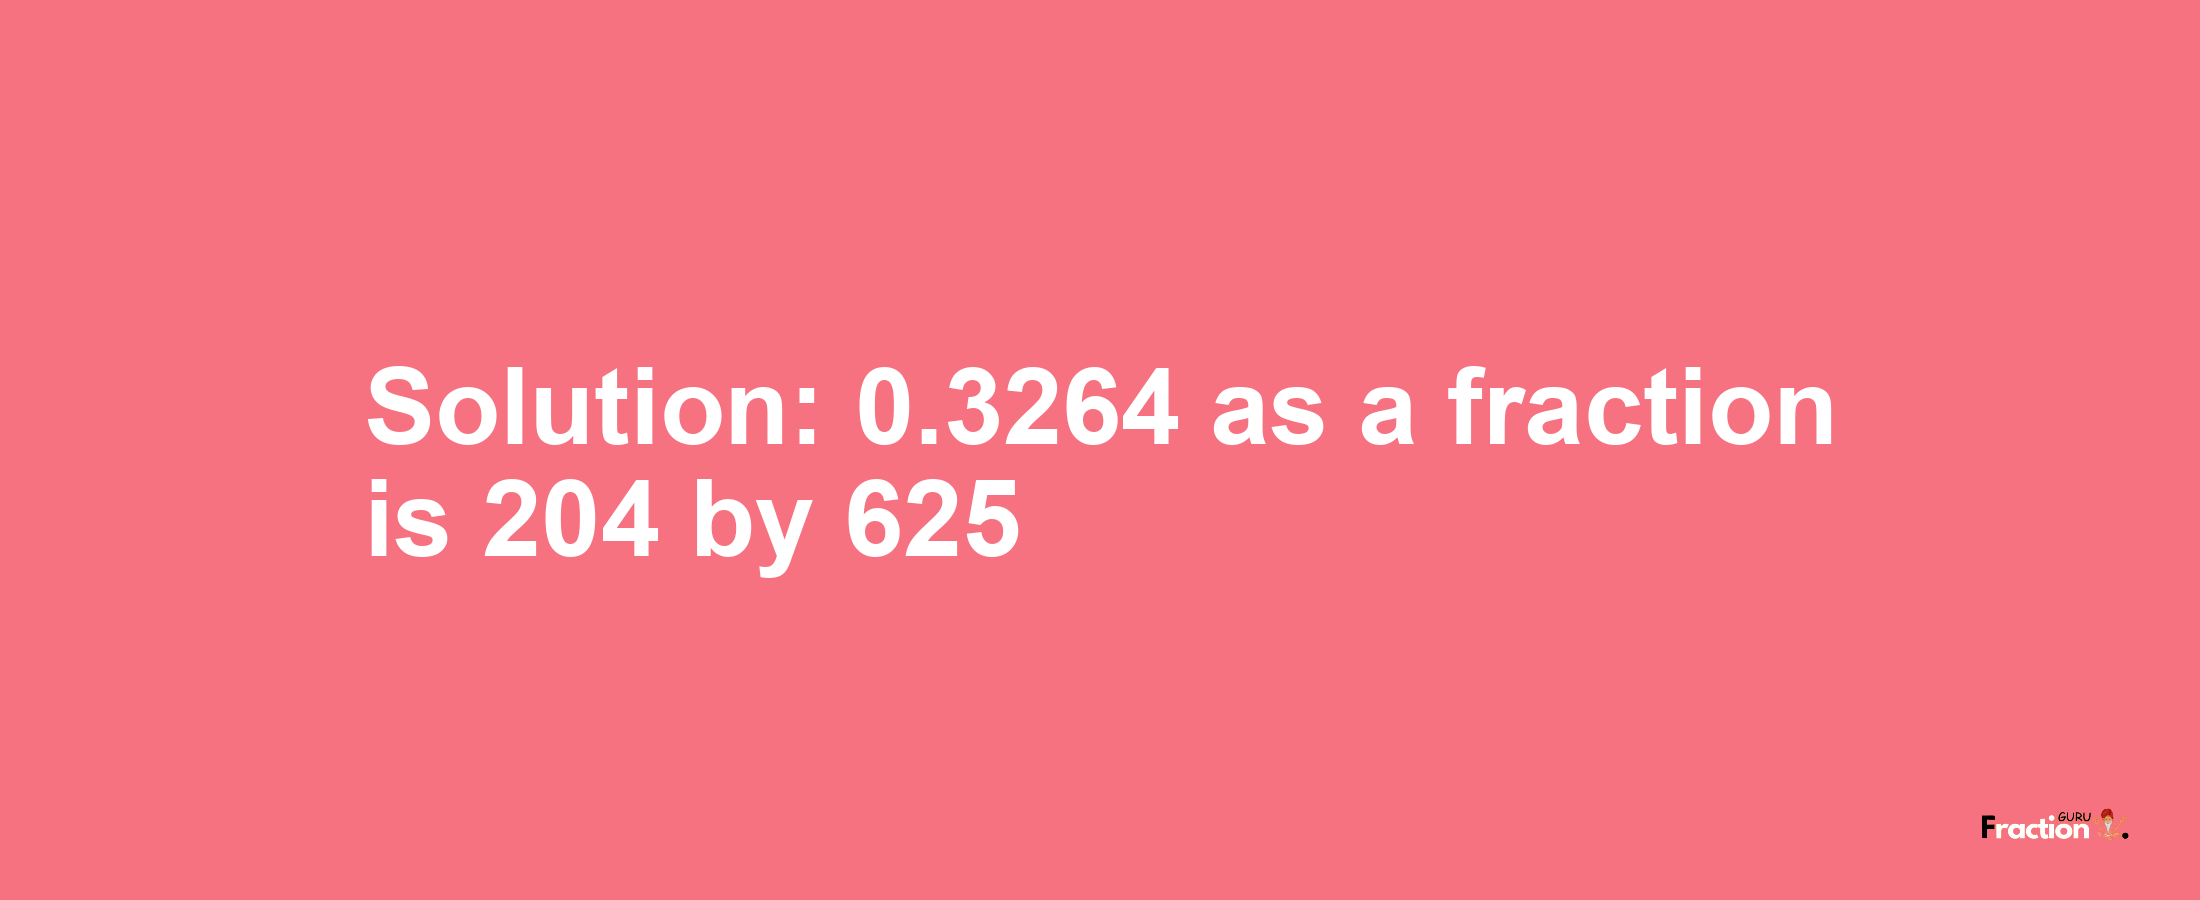 Solution:0.3264 as a fraction is 204/625